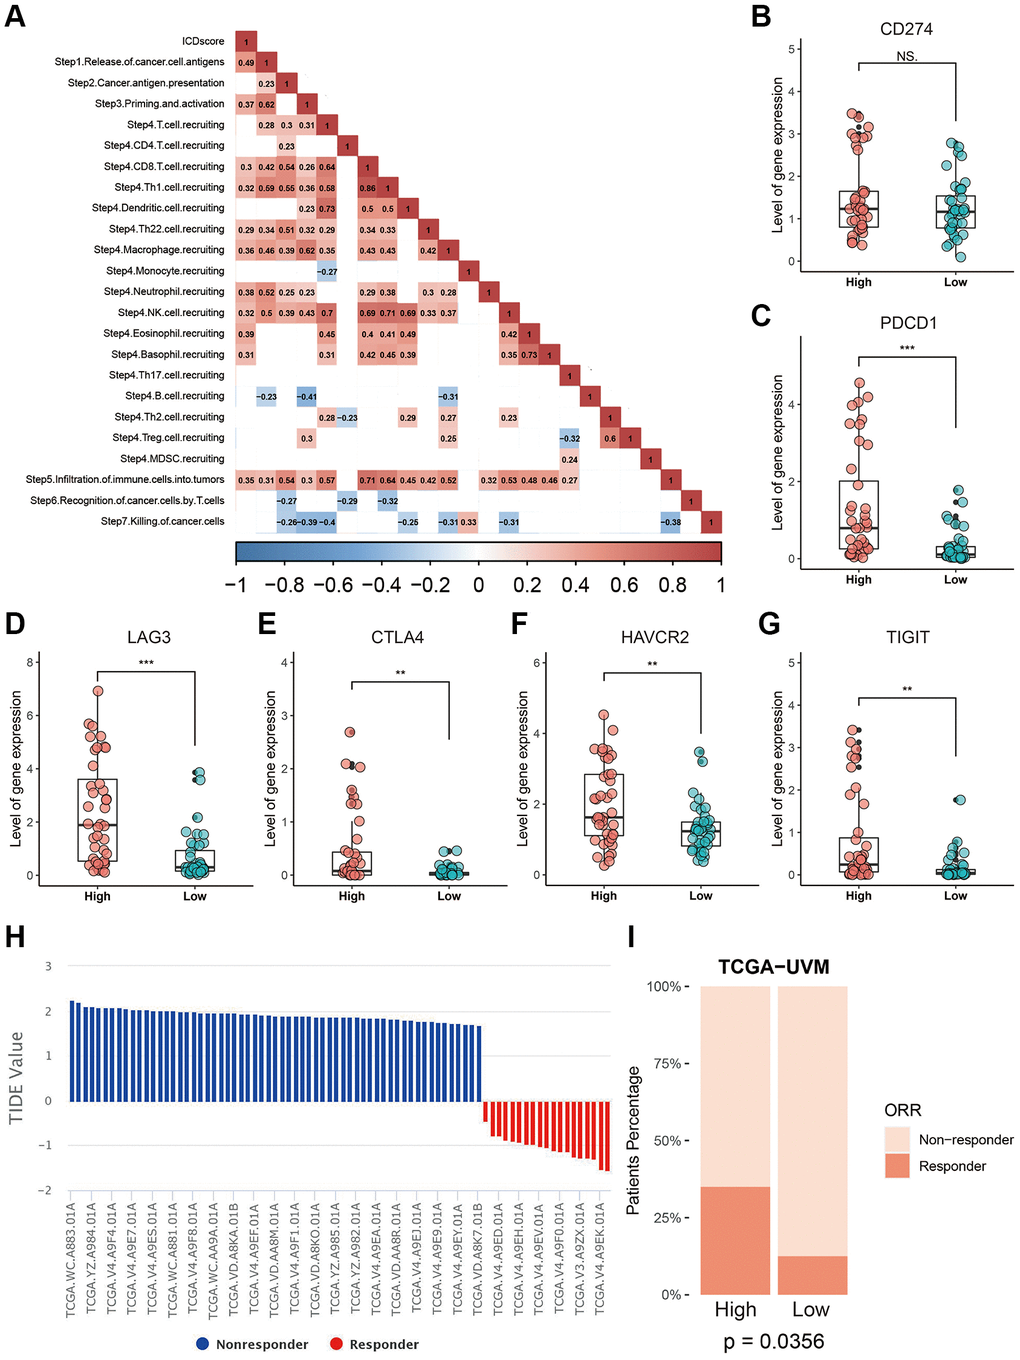 Correlation between the ICDscore and anti-tumor immunotherapy. (A) Correlation analysis between the ICDscore and the status of anti-cancer immunity. (B–G) The expression levels of CD274, PDCD1, LAG3, CTLA4, HAVCR2, and TIGIT in UVM patients in the high-ICDscore and the low-ICDscore subgroups of the TCGA-UVM cohort. (H) TIDE score and immunotherapy response rate of UVM patients from TCGA-UVM cohort. (I) Immunotherapy response rate of UVM patients from TCGA-UVM cohort with high-ICDscore and low-ICDscore. Abbreviation: Ns: not significant. *p **p ***p 